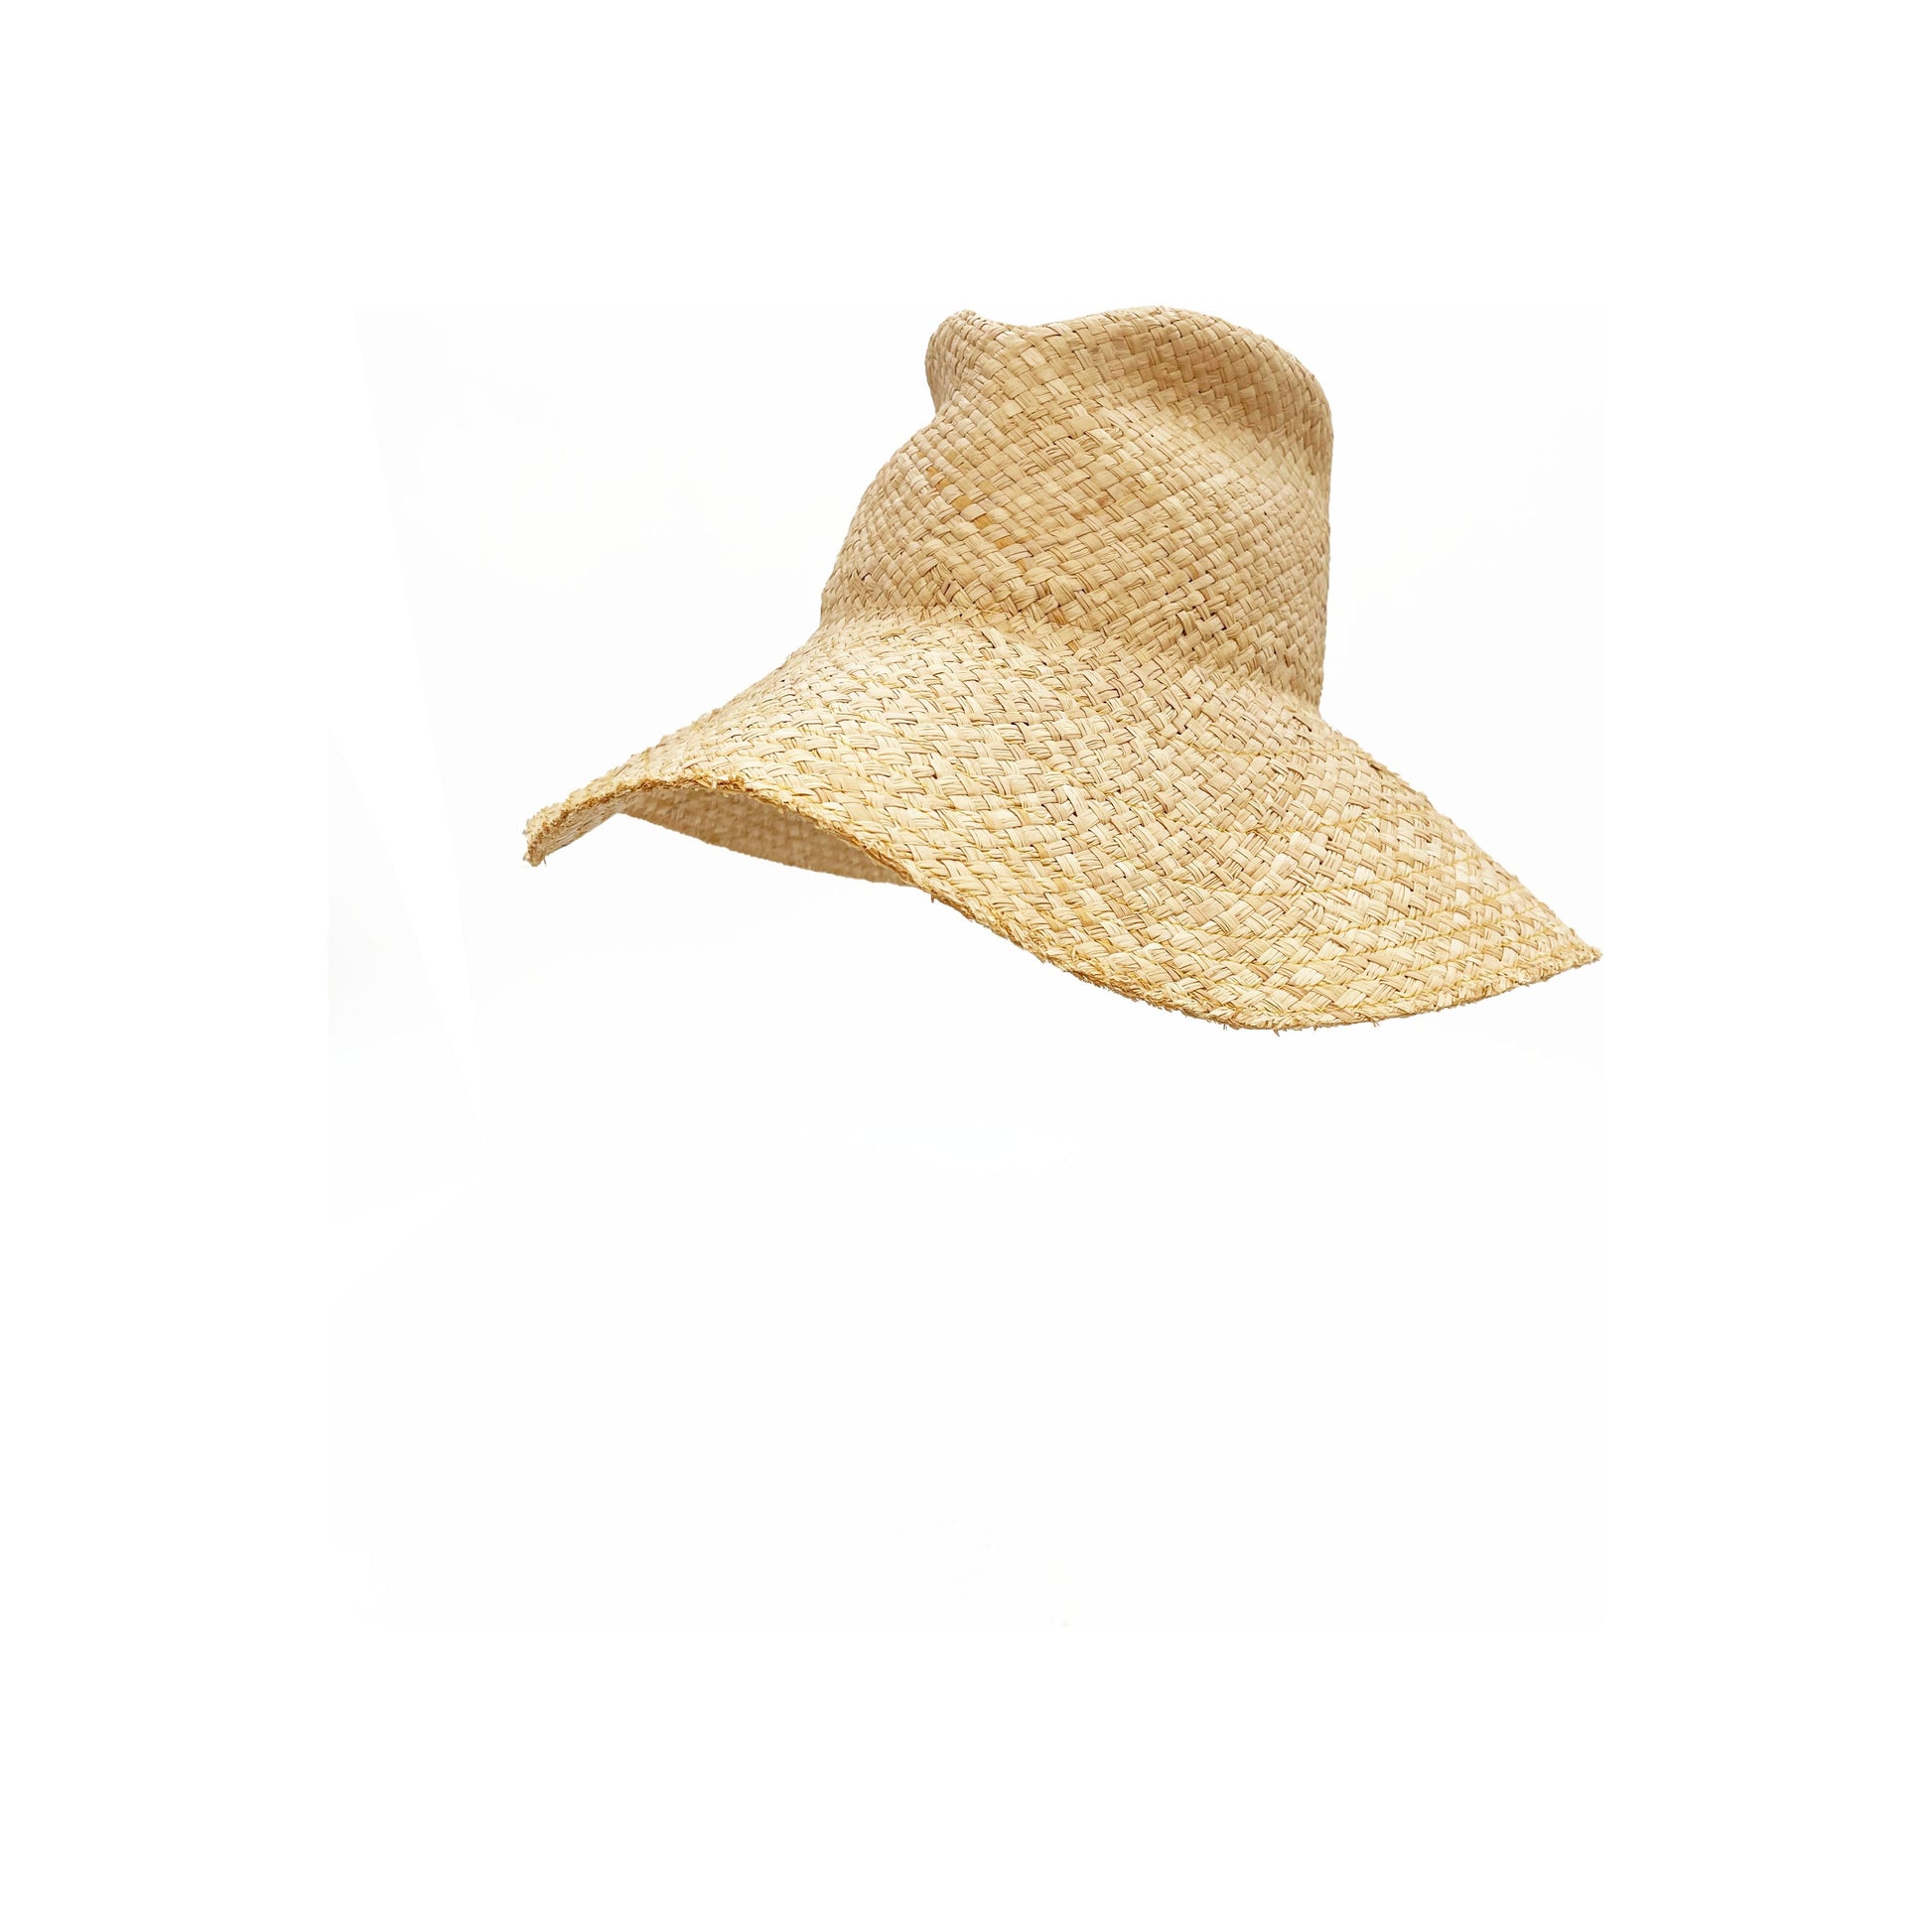 A wide-brimmed Commando raffia straw hat isolated on a white background by Lola Hats.